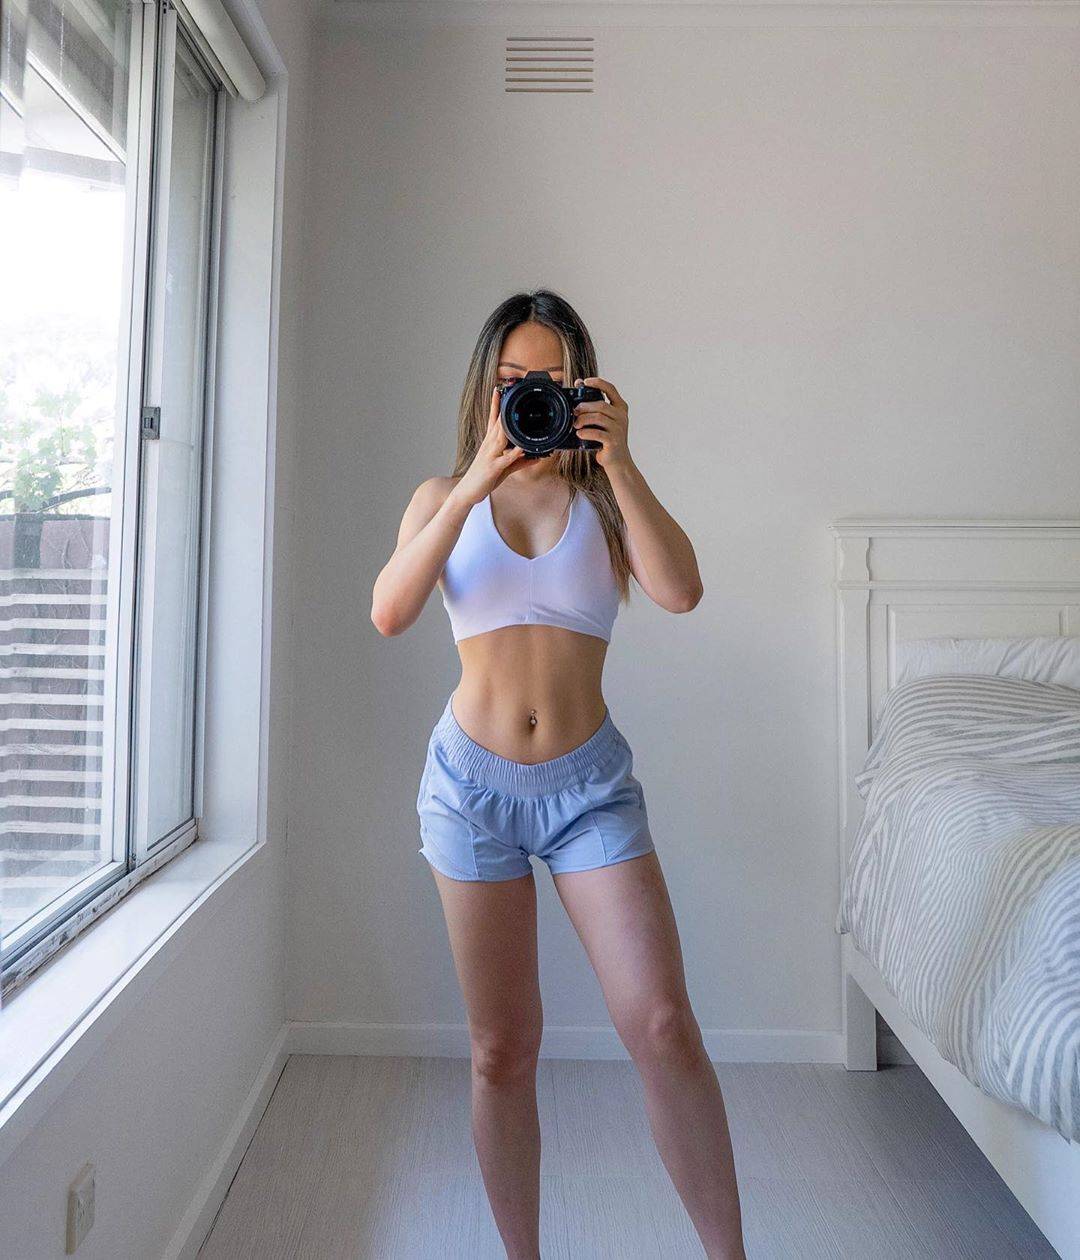 The Chloe Ting Workouts Everyone Is Raving About